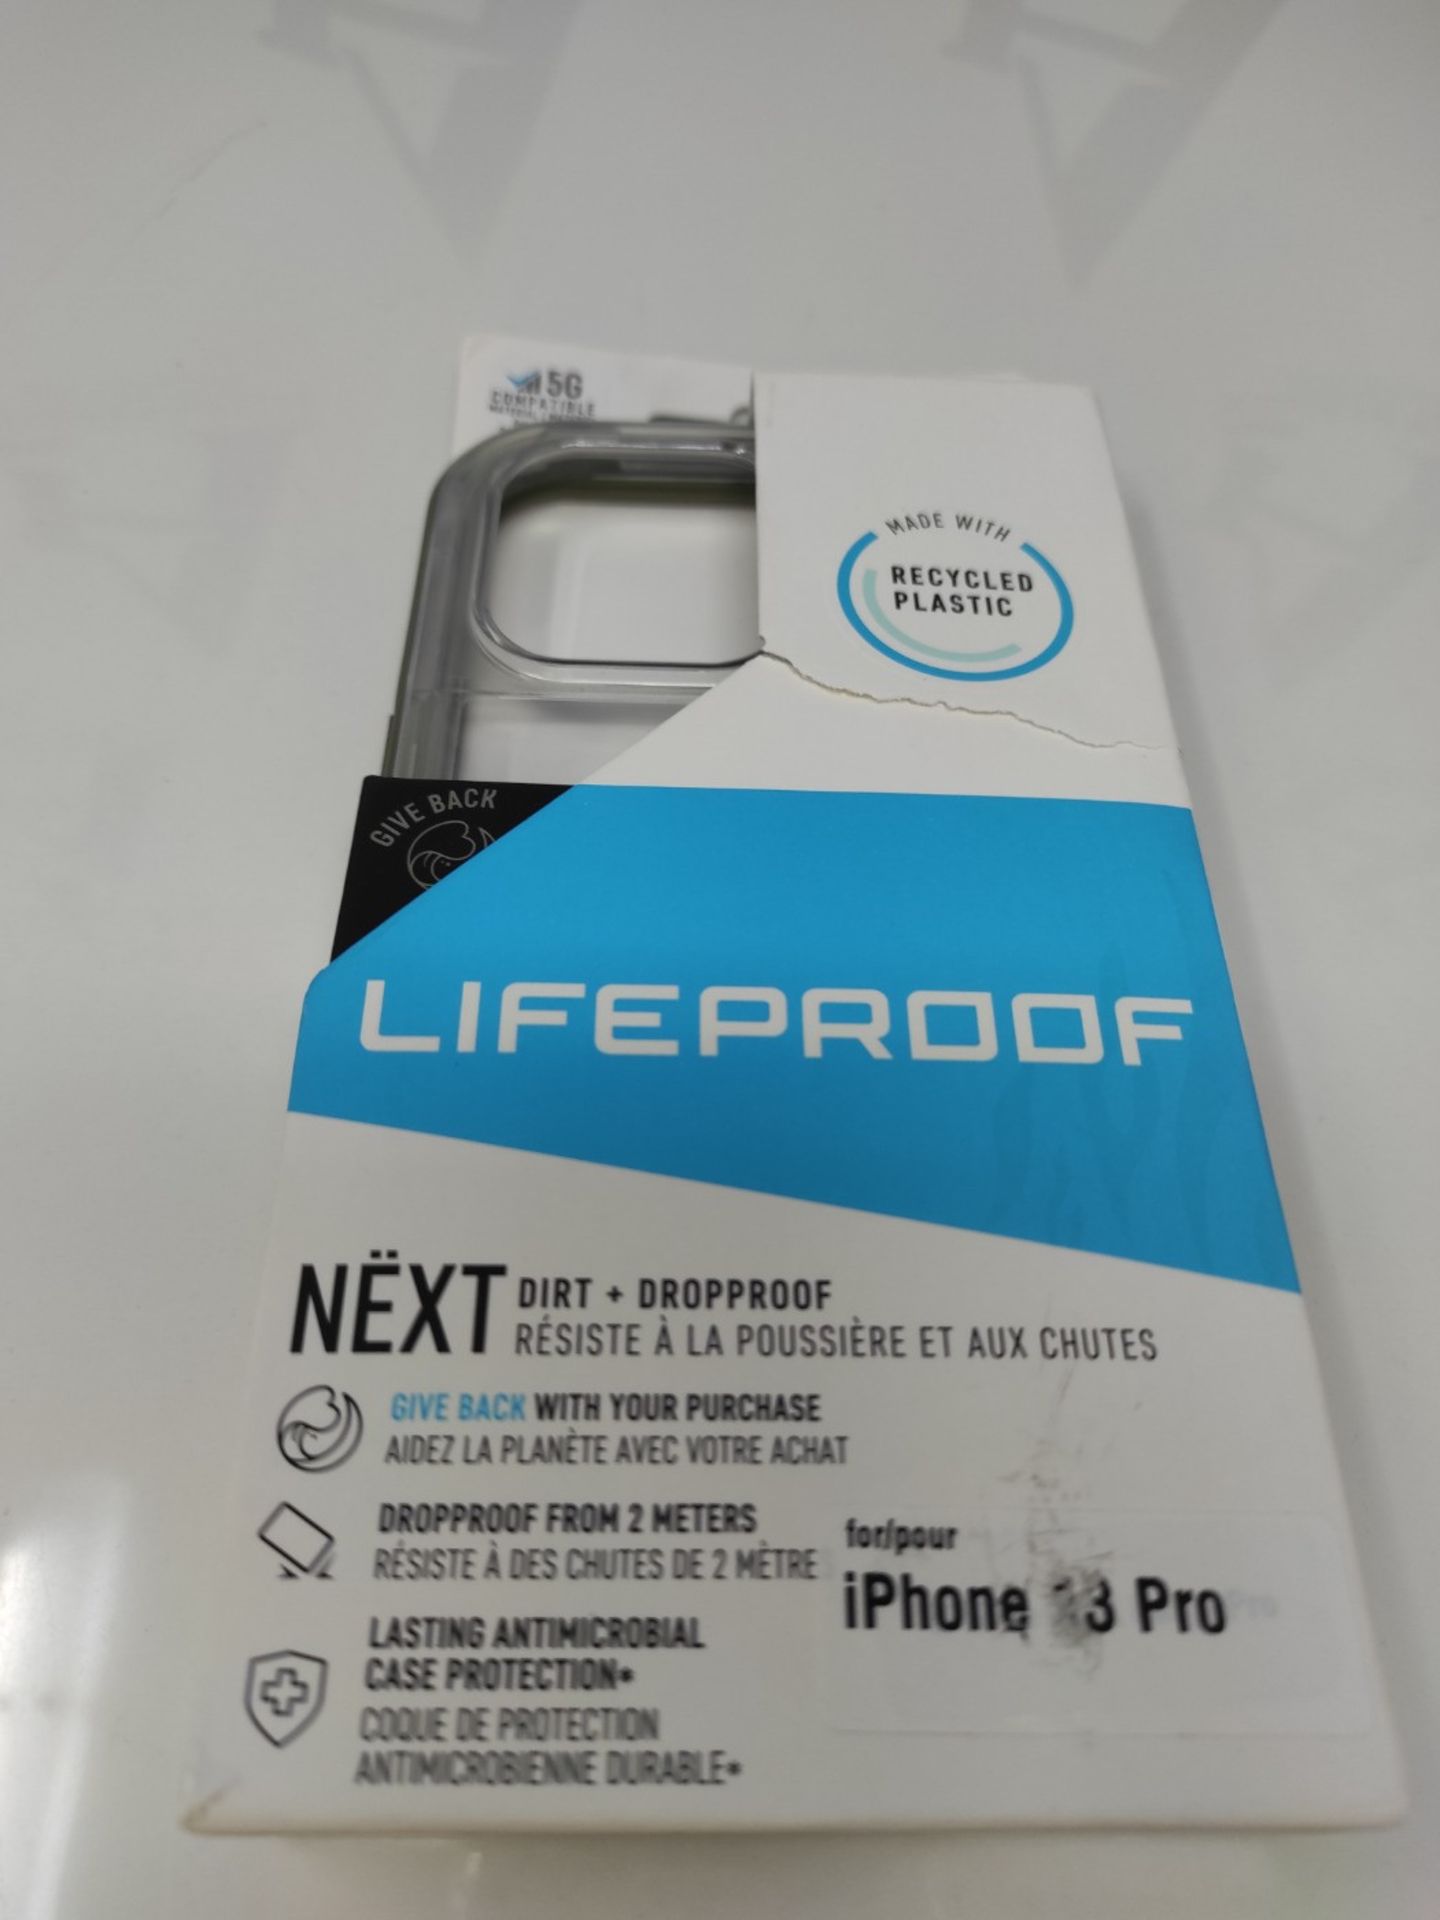 LifeProof for Apple iPhone 13 Pro, drop-proof, dirt-resistant, and snow-proof protecti - Image 2 of 3